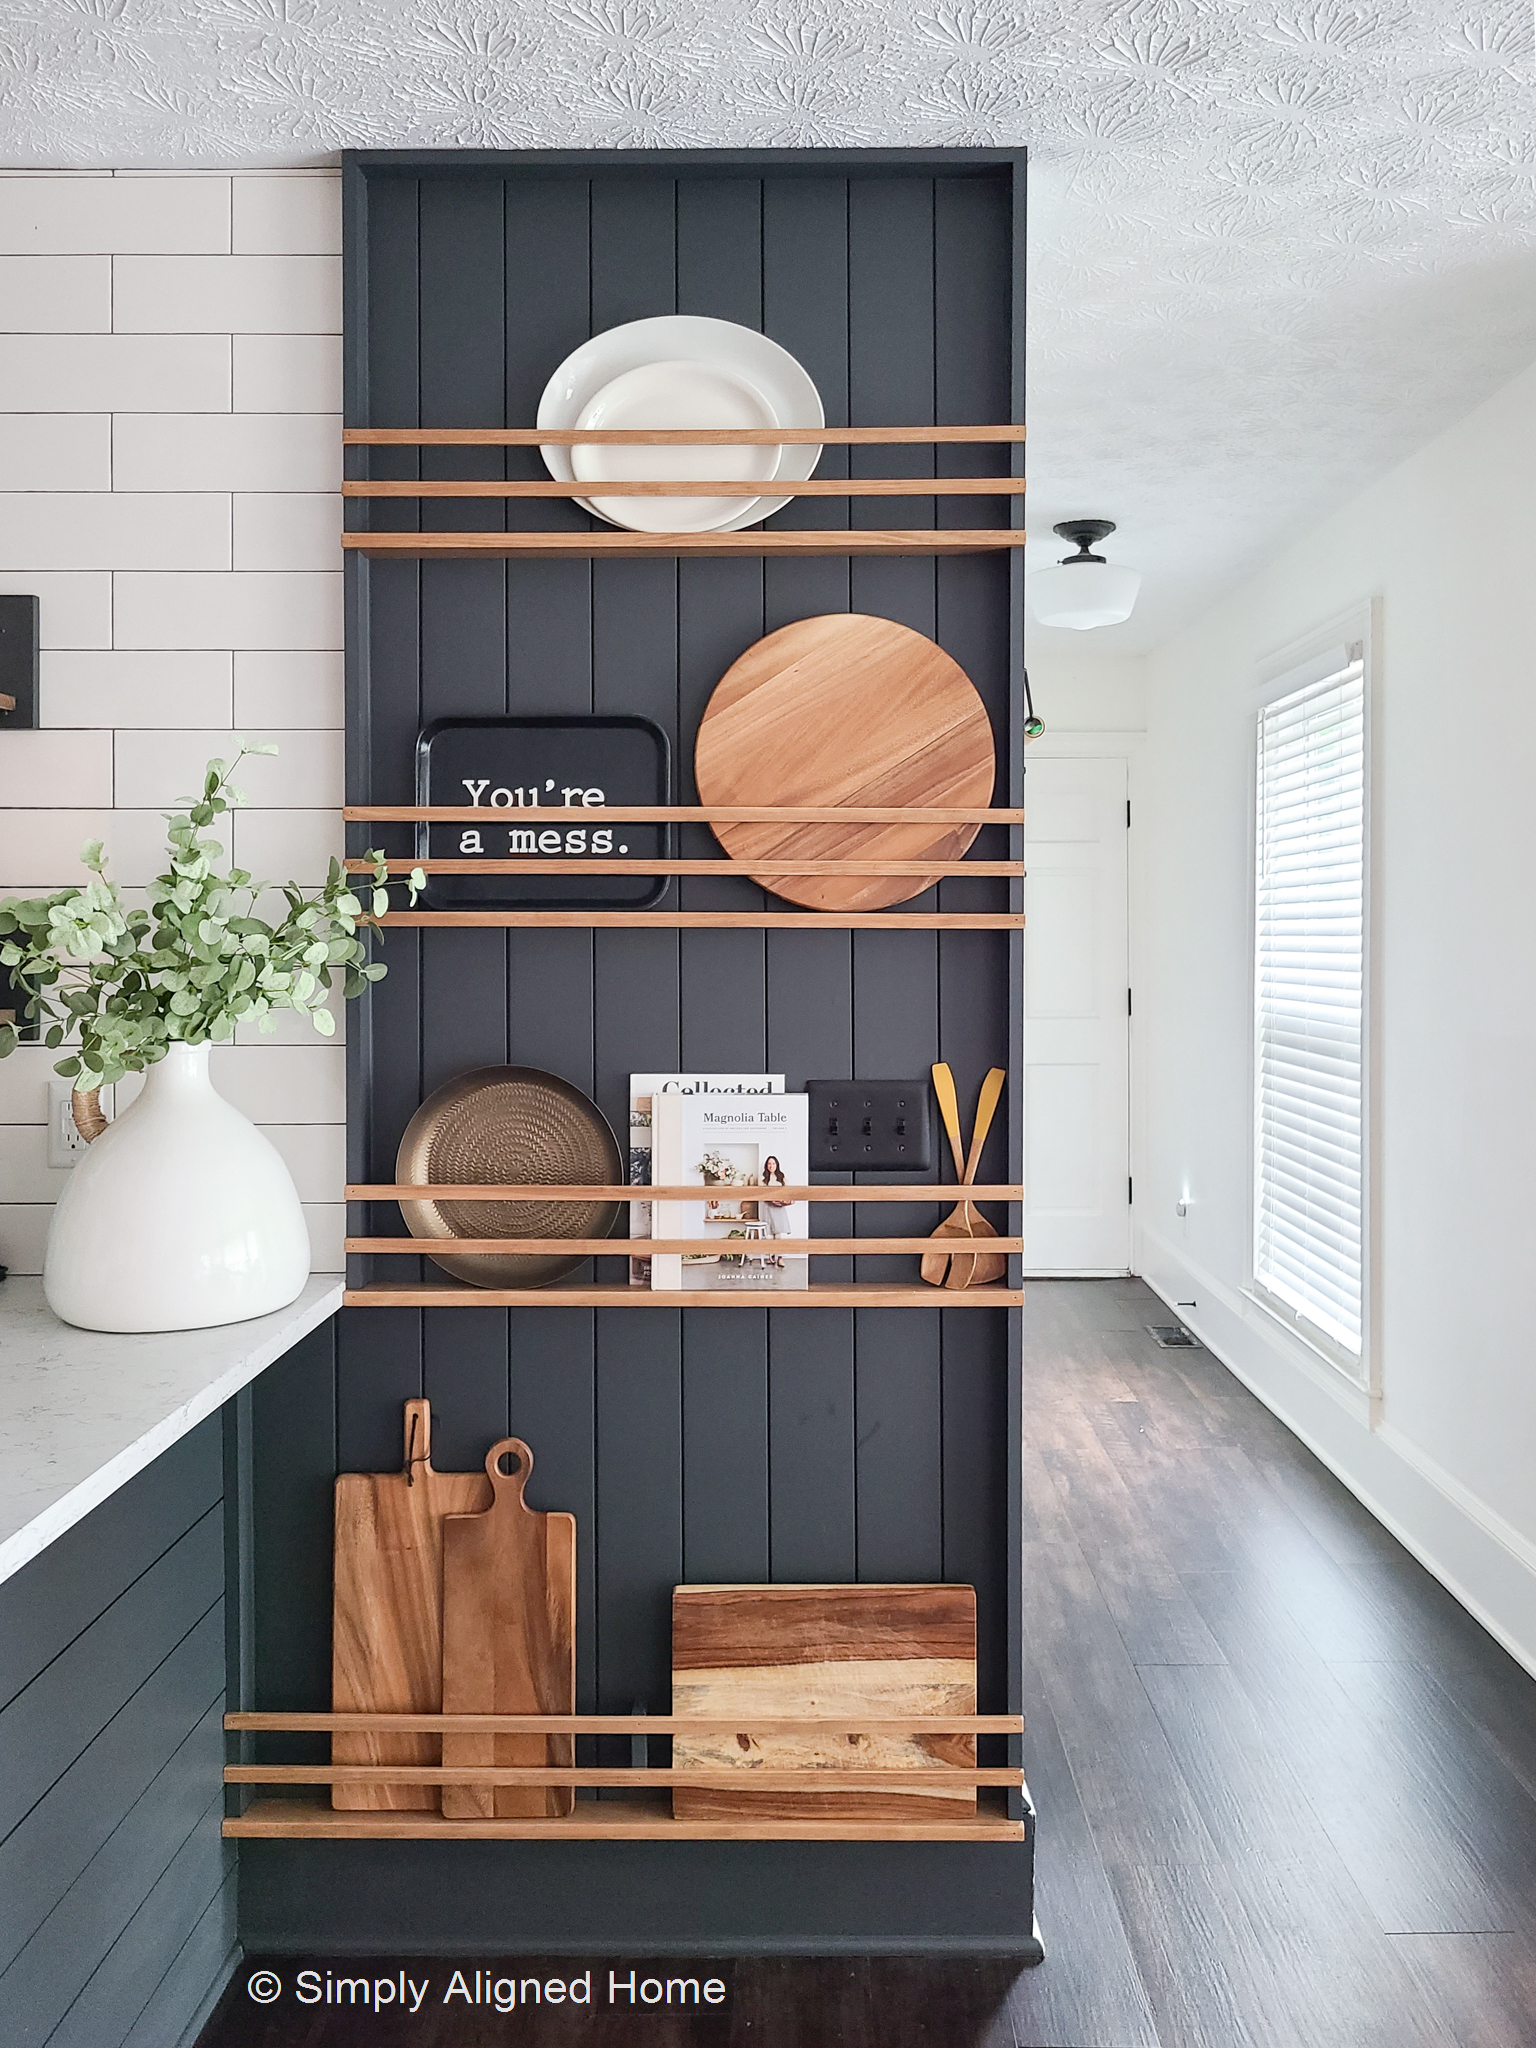 How To Make A Diy Shiplap Plate Rack Simply Aligned Home